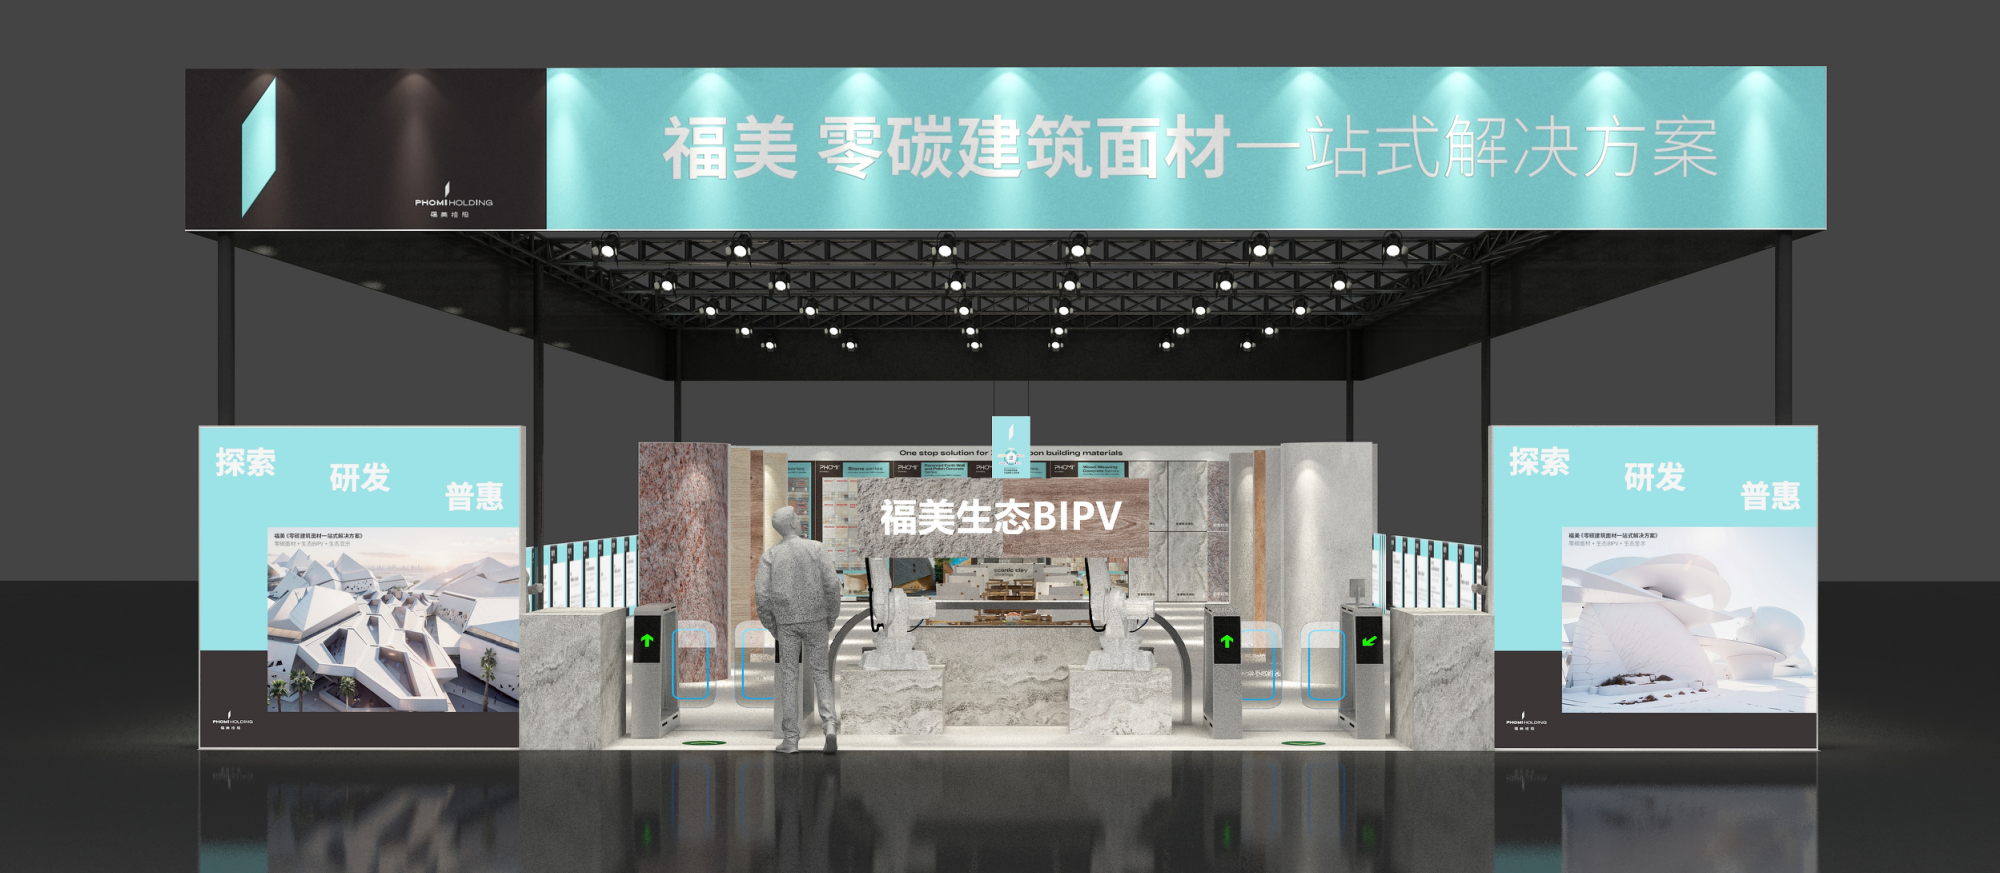 Phomi Photoelectric Coverings will be unveiled at the Foshan Uniceramic Expo!